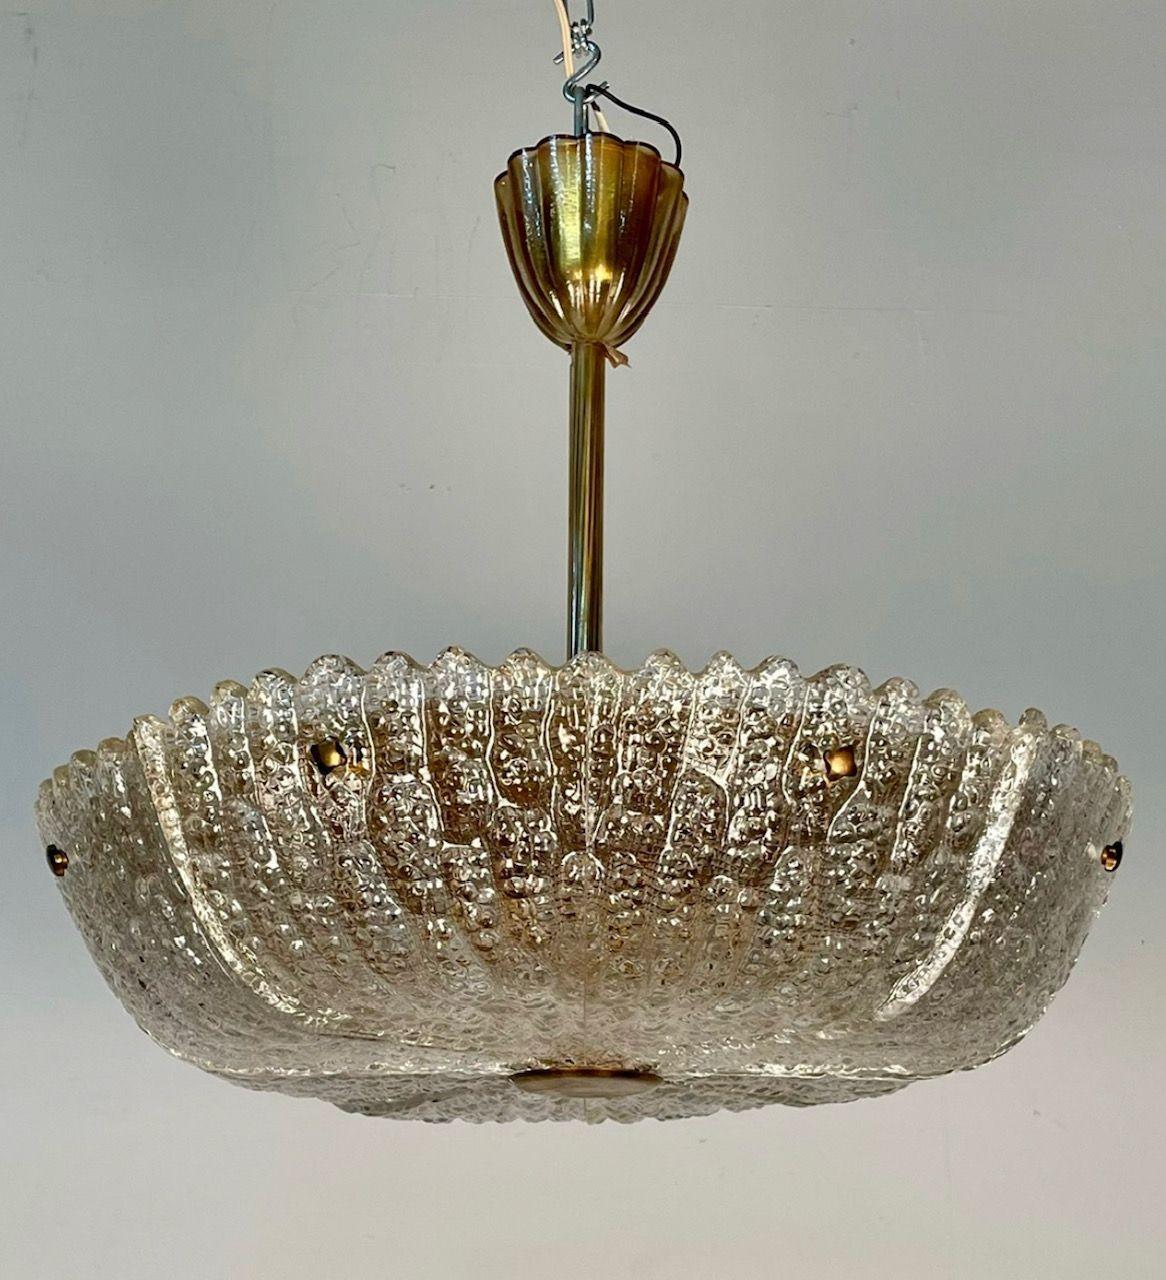 Swedish Mid-Century Modern Chandelier / Pendant by Carl Fagerlund for Orrefors
 
Textured Glass, Brass
Sweden, c. 1960s
 
24 dia x 23 drop